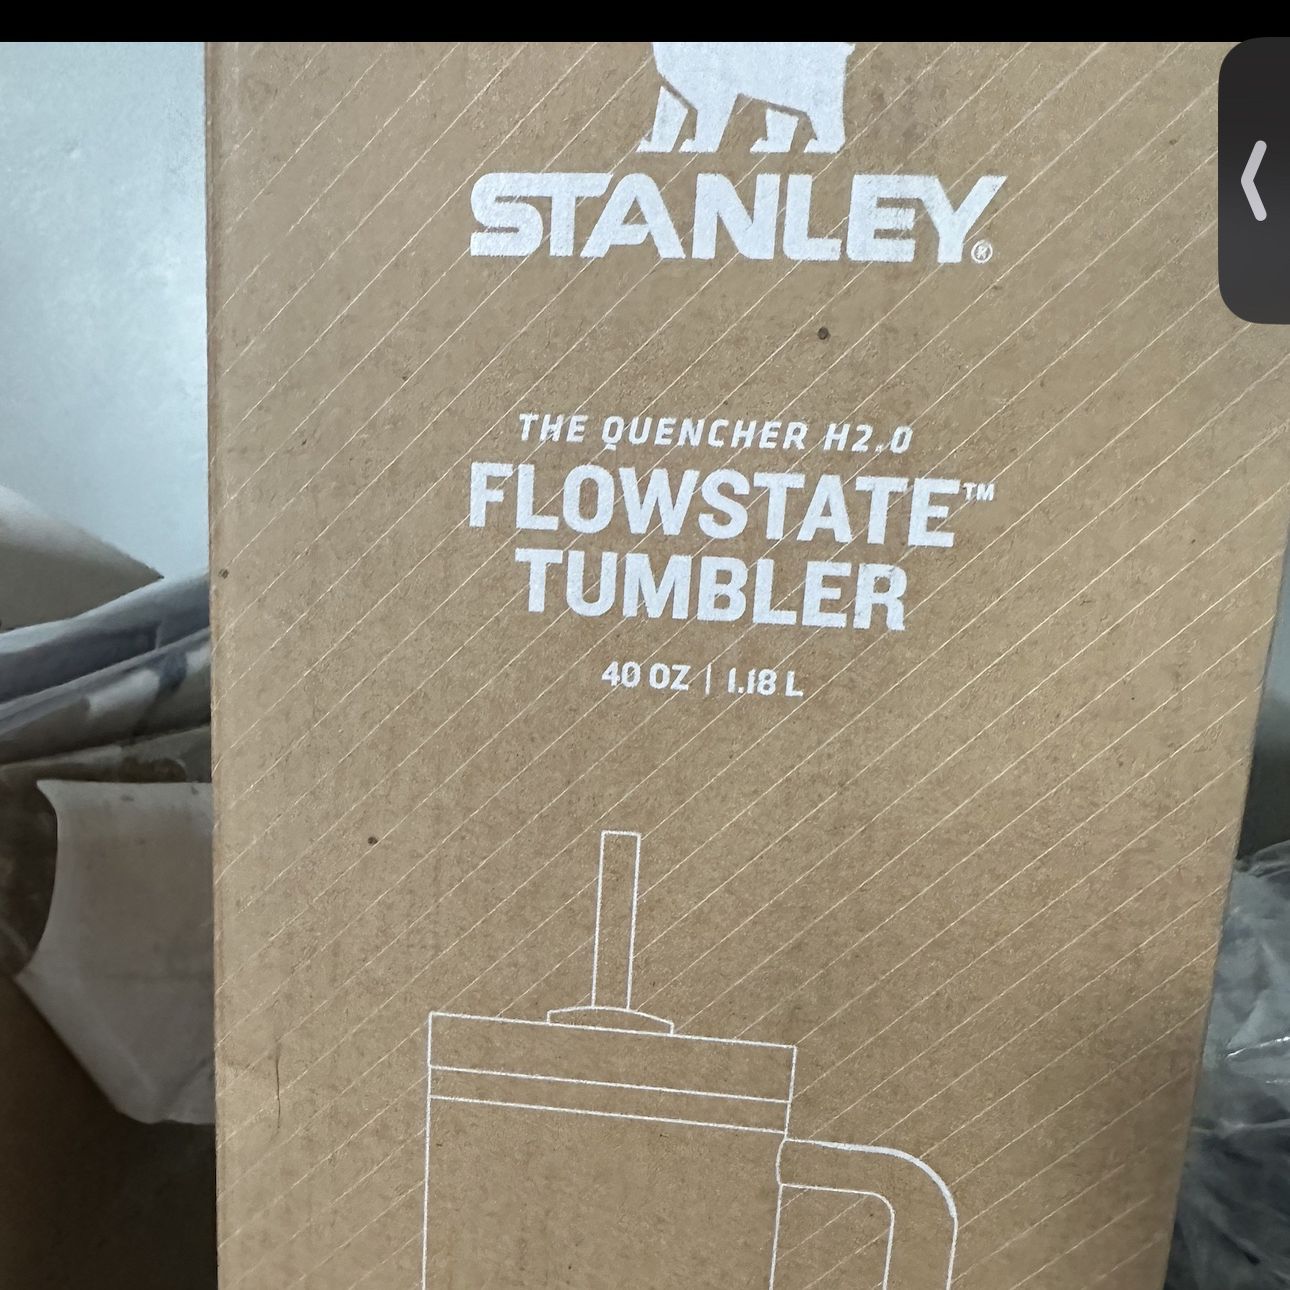 STANLEY THE QUENCHER H2.0 FLOWSTATE TUMBLER 40 OZ PRIMROSE GLOW [IN HAND!]  for Sale in West Springfield, MA - OfferUp